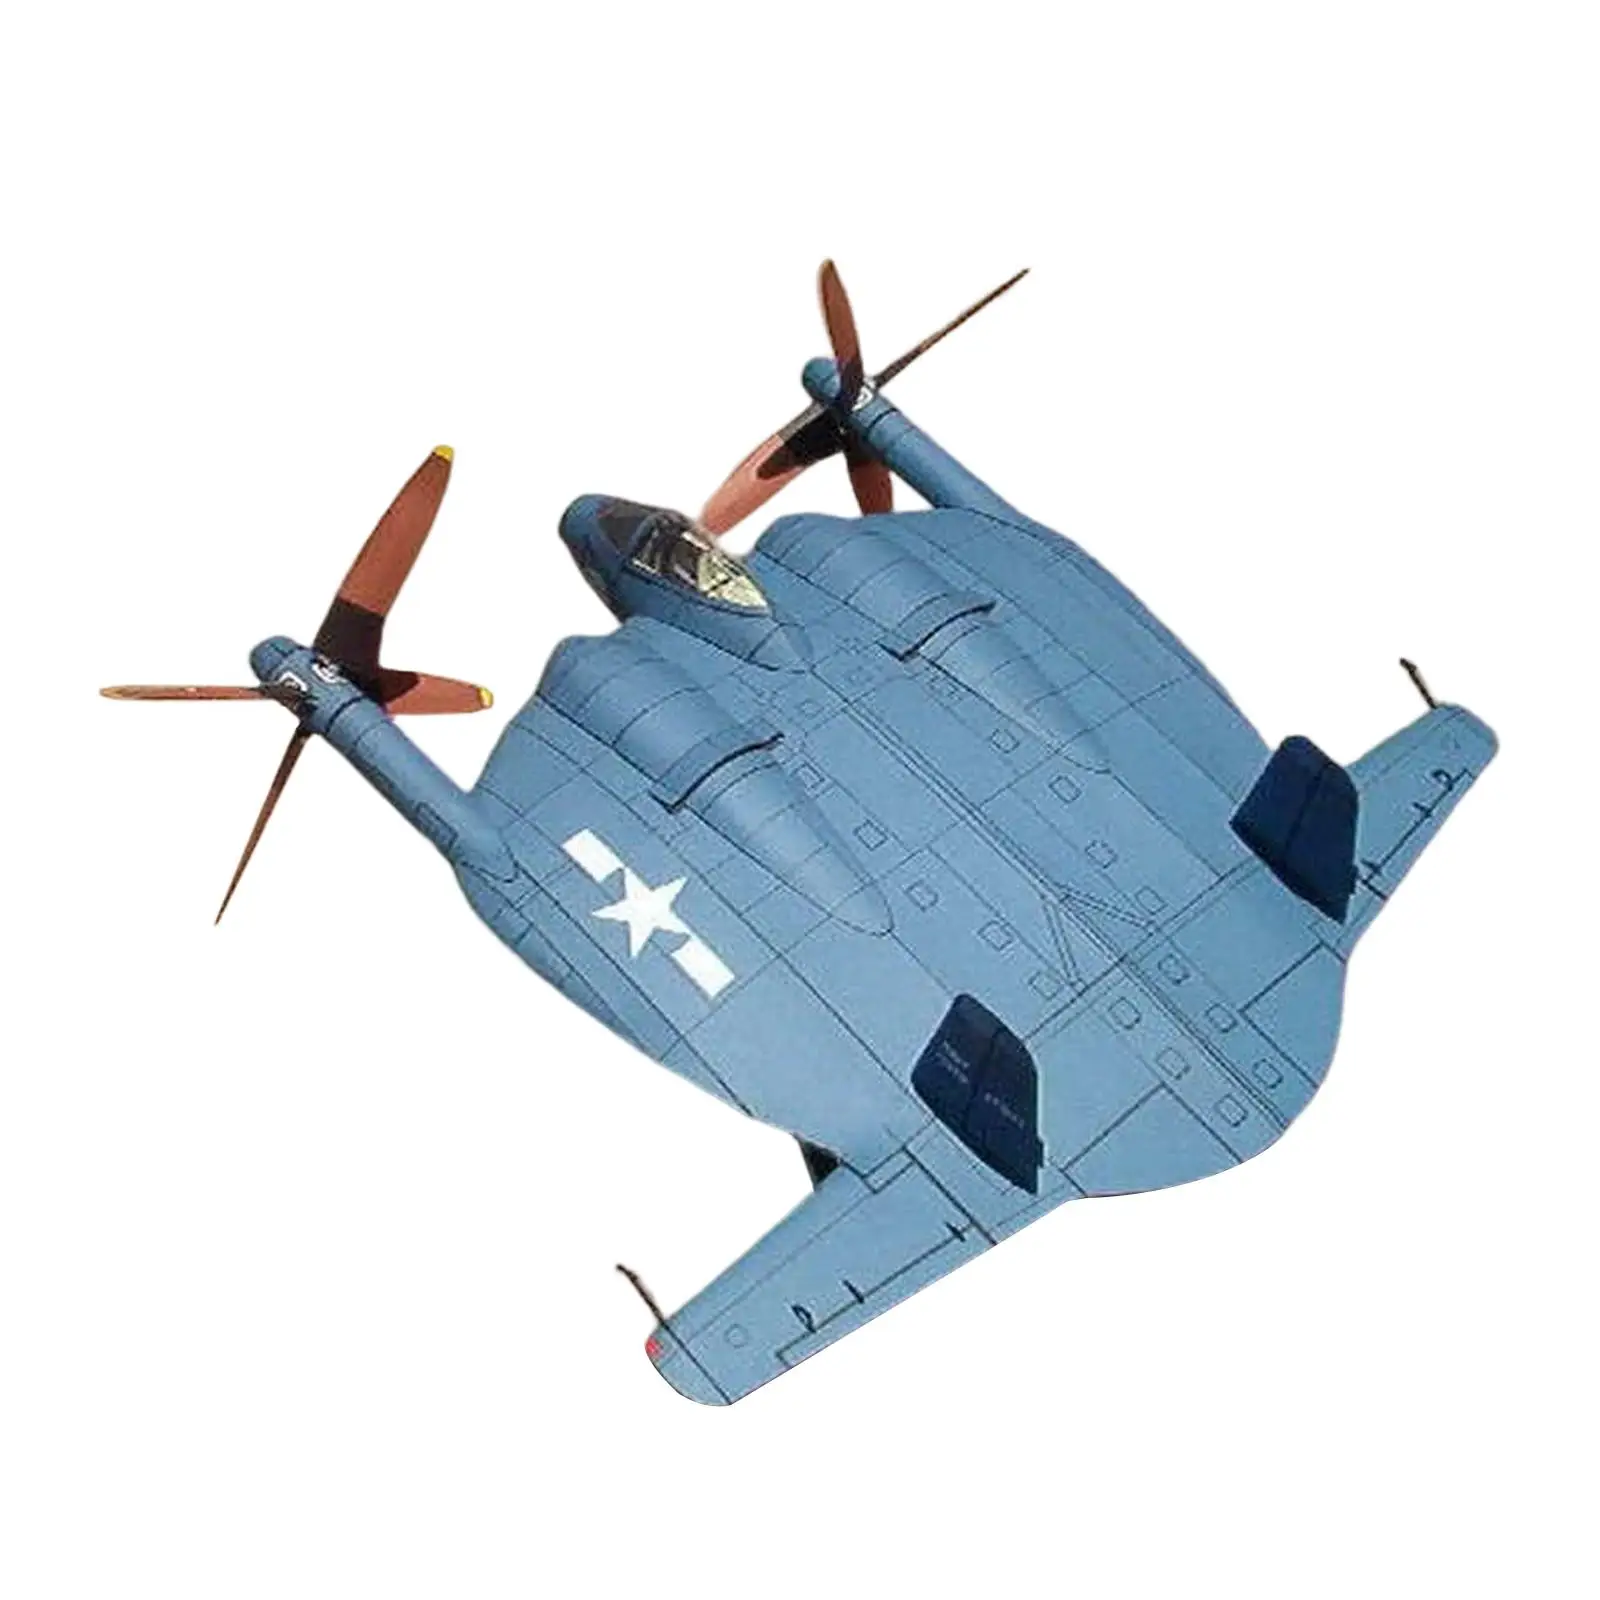 Fighter Model Toy Aircraft Plane Paper Model Handcrafts for Office Kids Gift